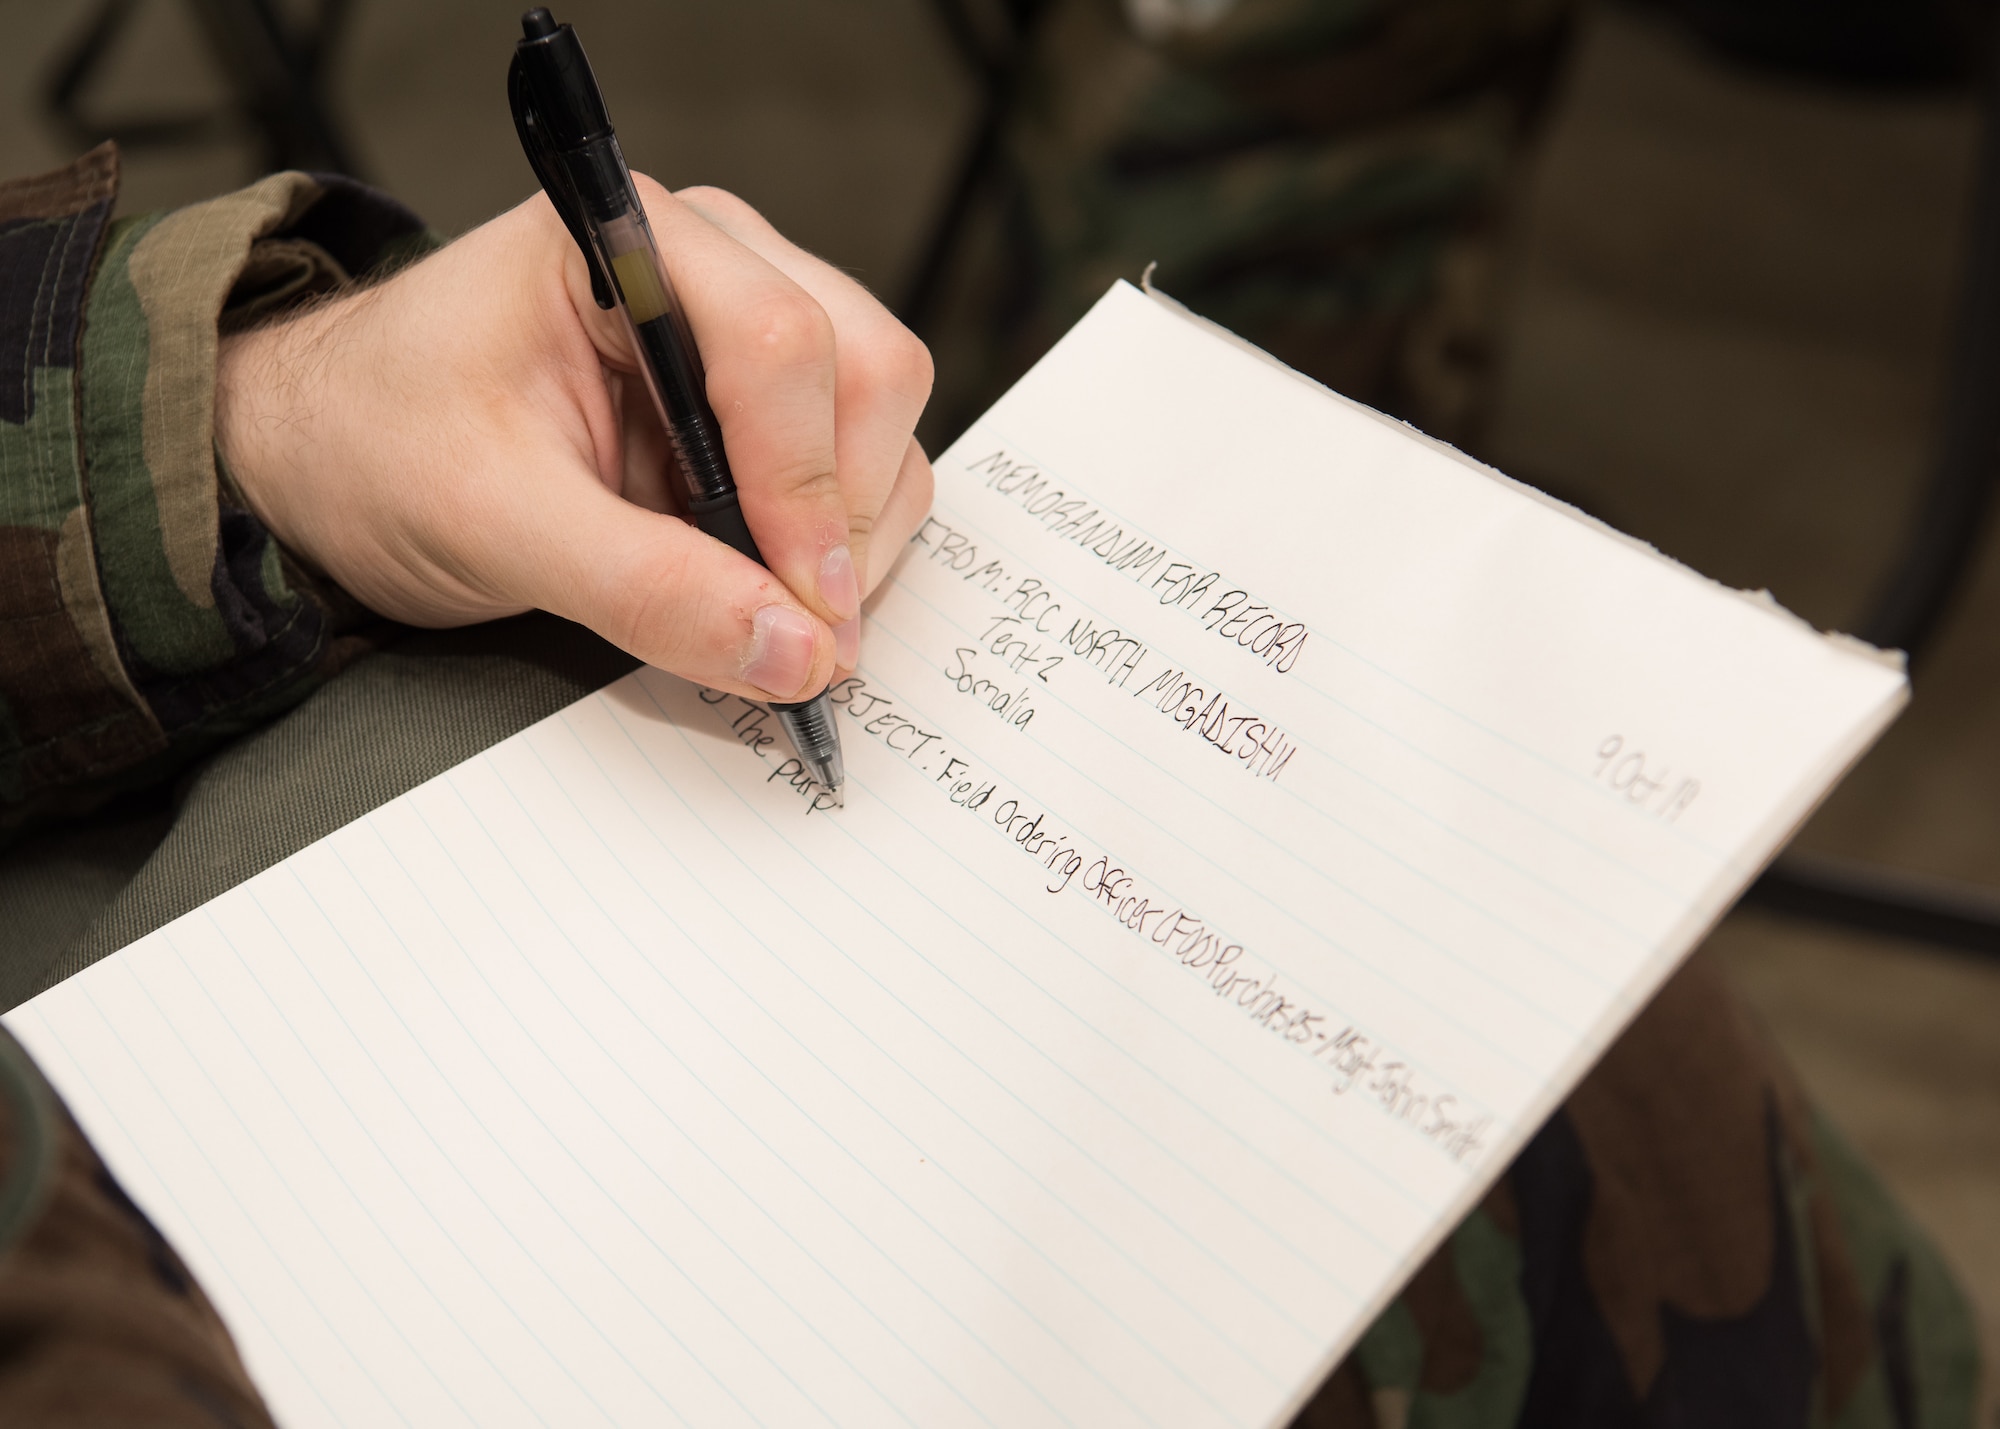 Senior Airman John Cone, a contracting administrator with the 509th Contracting Squadron, writes a memorandum during a mock deployment exercise, Oct. 9, 2019, at Whiteman Air Force Base, Missouri. Operation Pathfinder simulated sending two teams of nine contracting Airmen to establish a deployed base for 700 joint personnel in Mogadishu, Somalia. (U.S. Air Force photo by Airman 1st Class Parker J. McCauley)